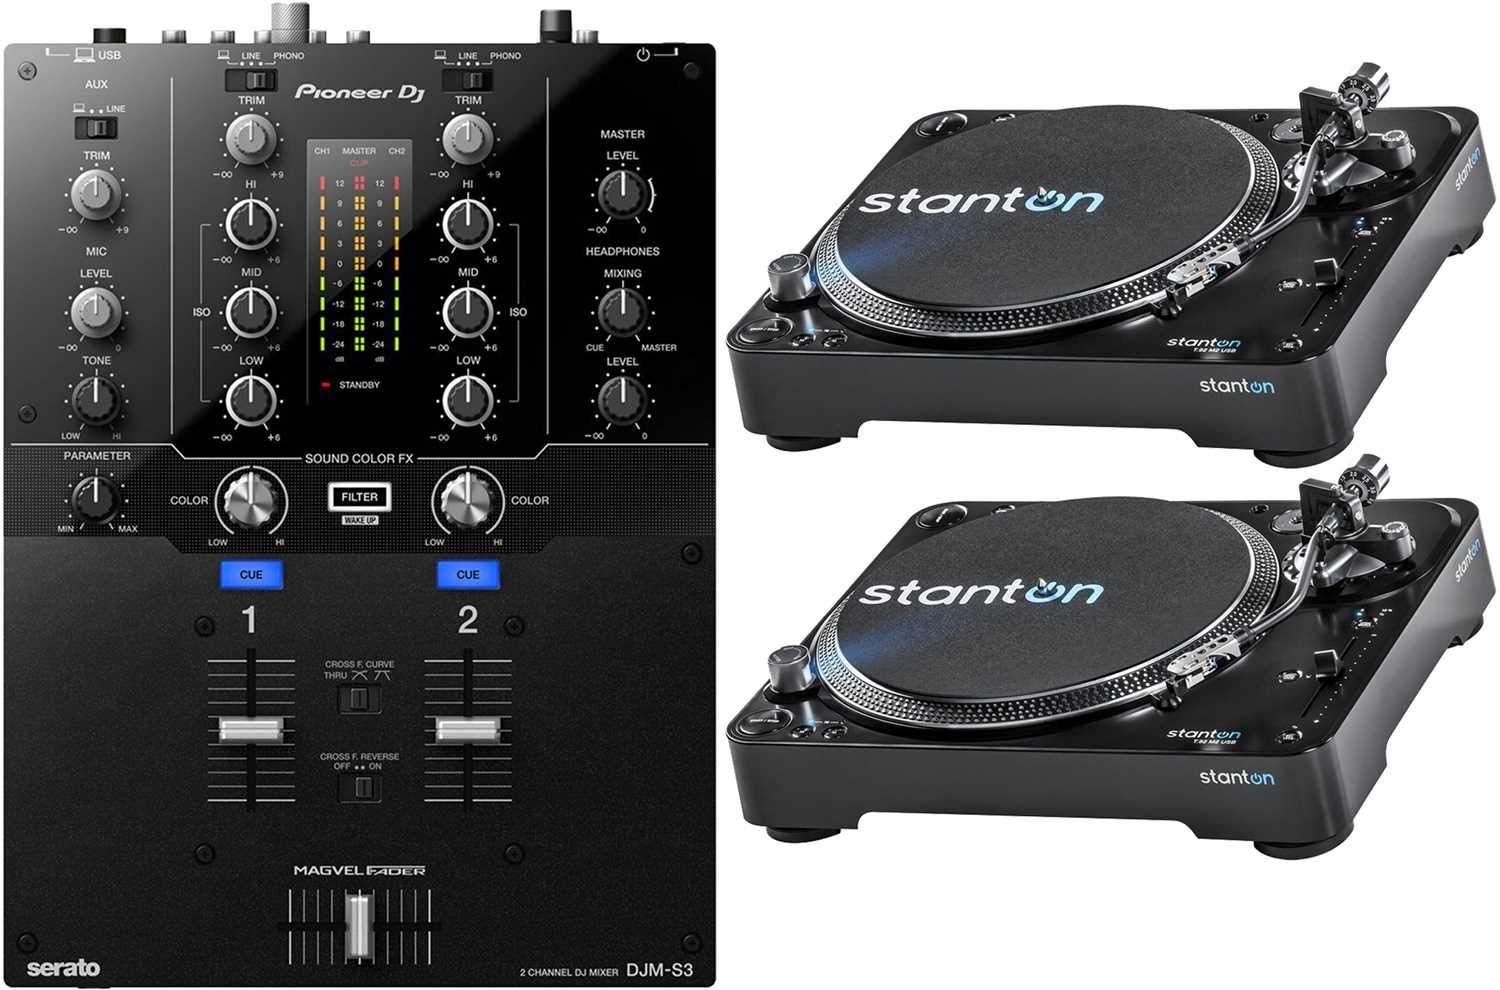 Pioneer DJ DJM S3 2 Channel Mixer for Serato DJ with Stanton Turntables